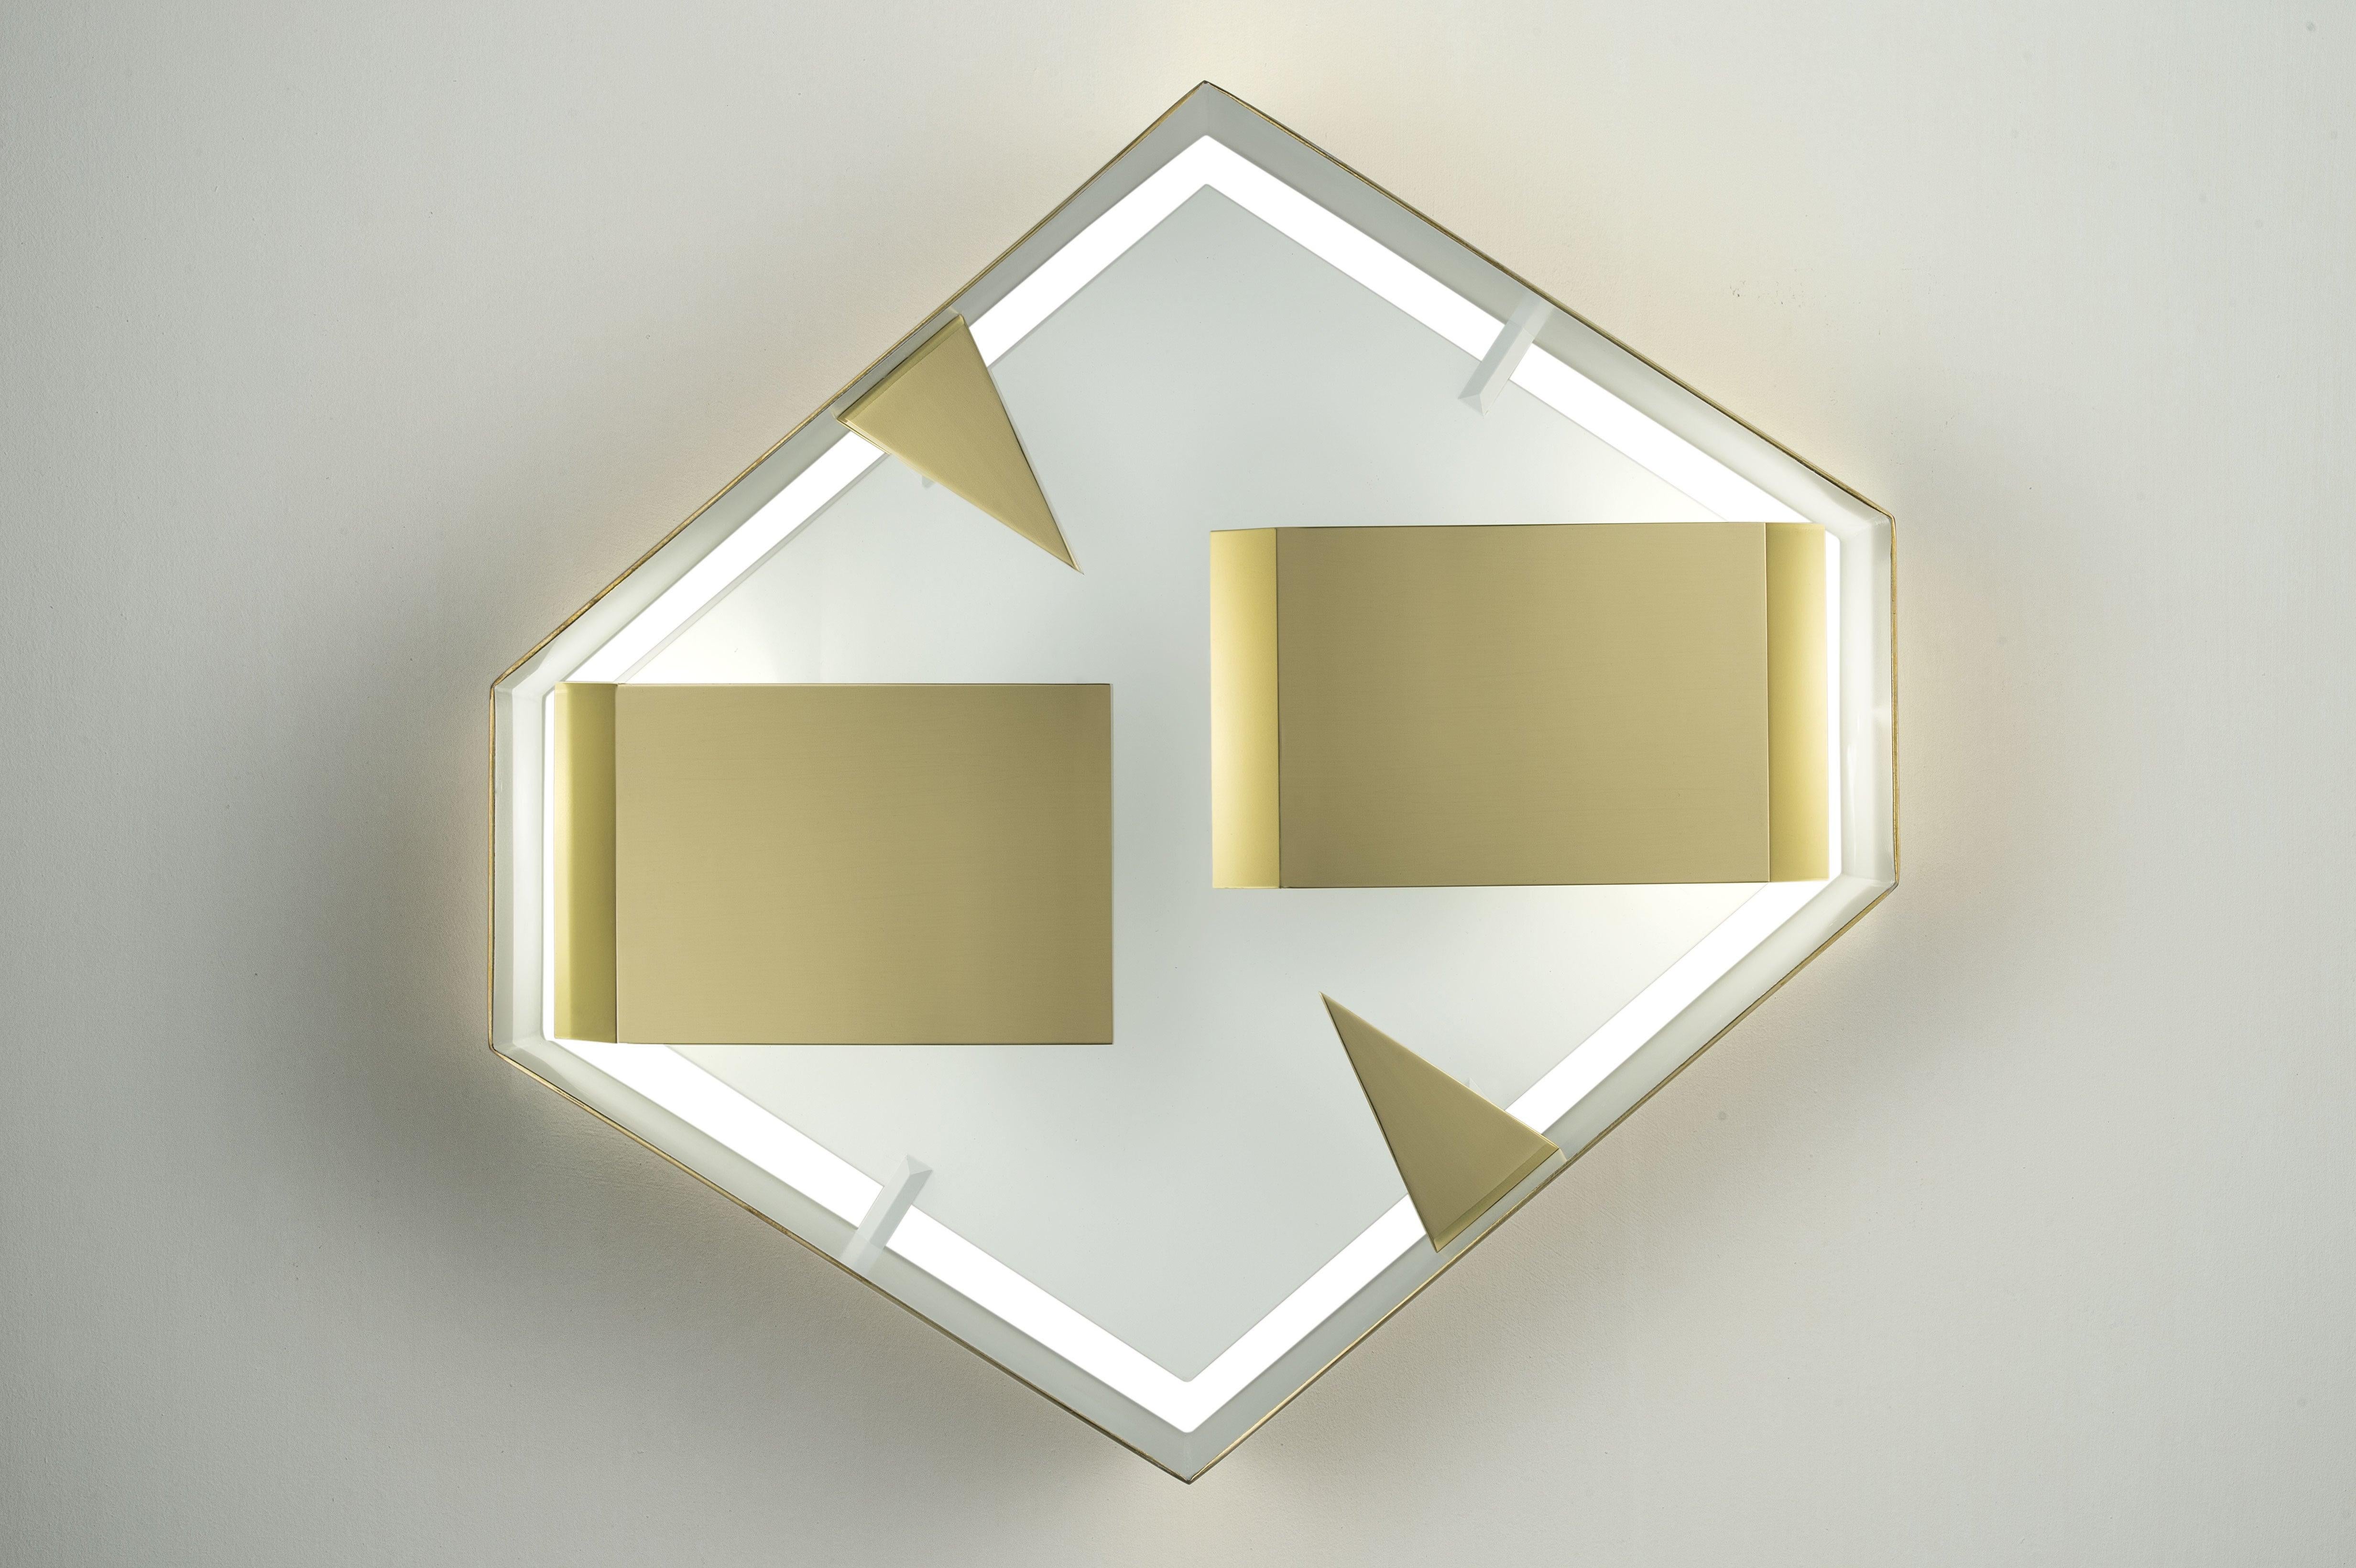 Wall sconce hexagonal 'Screen of Light' design by Gio Ponti Italy polished brass Wall sculpture light in polished brass, timeless iconic design. Handcrafted product, realised by Pollice Illuminazione from the original drawings of Gio Ponti with